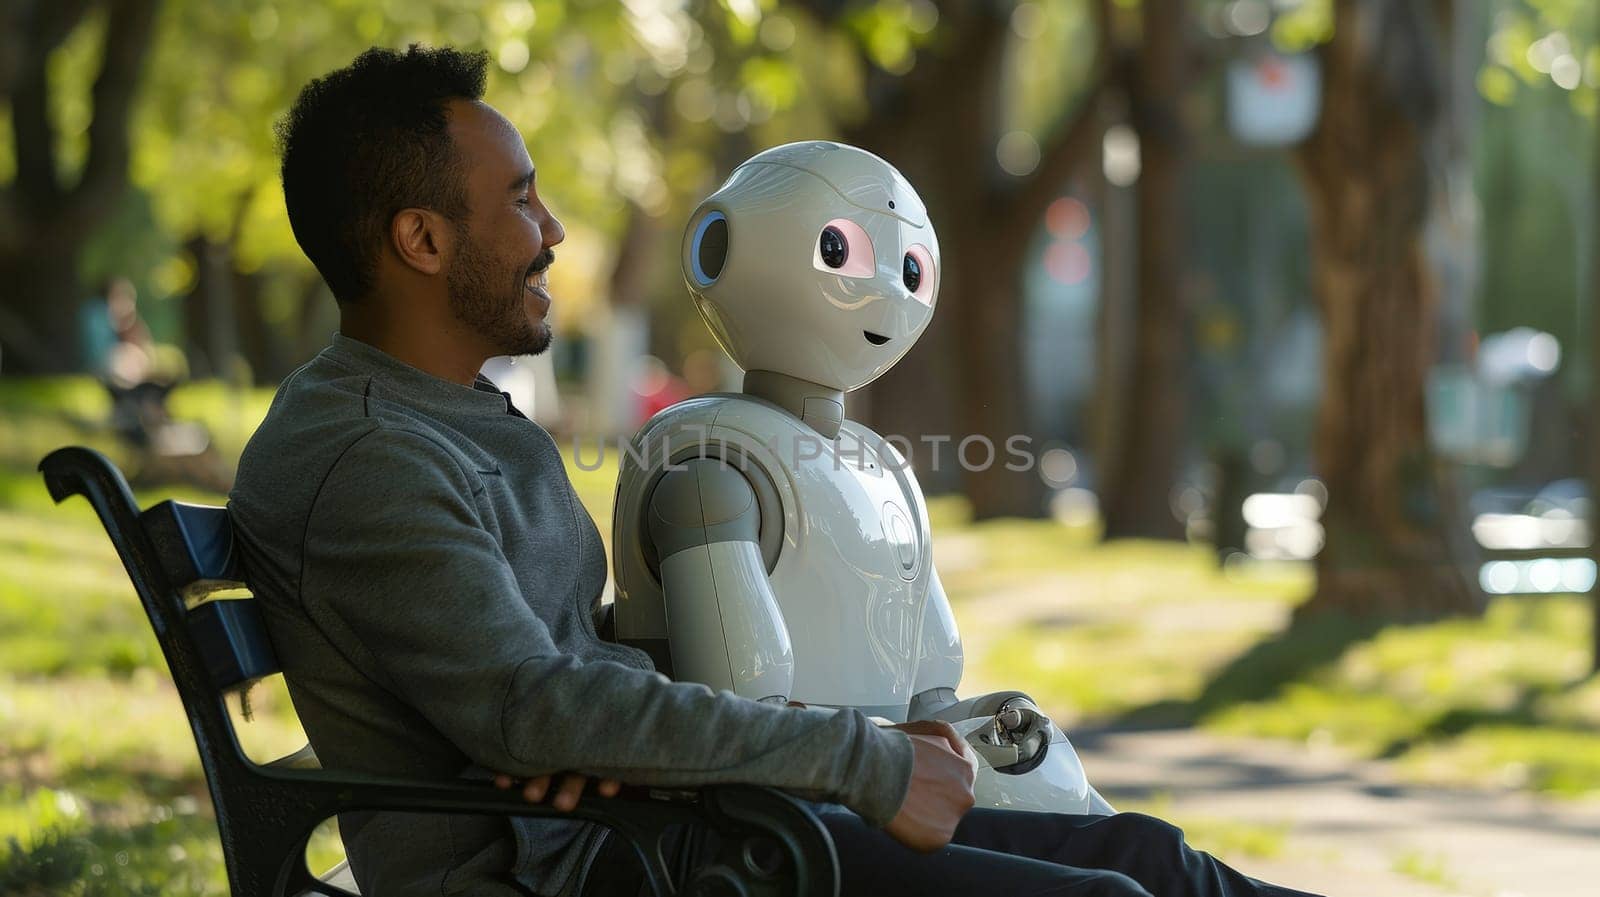 A man and a robot sitting together on a park bench, Demonstrating a bond of friendship and companionship by nijieimu